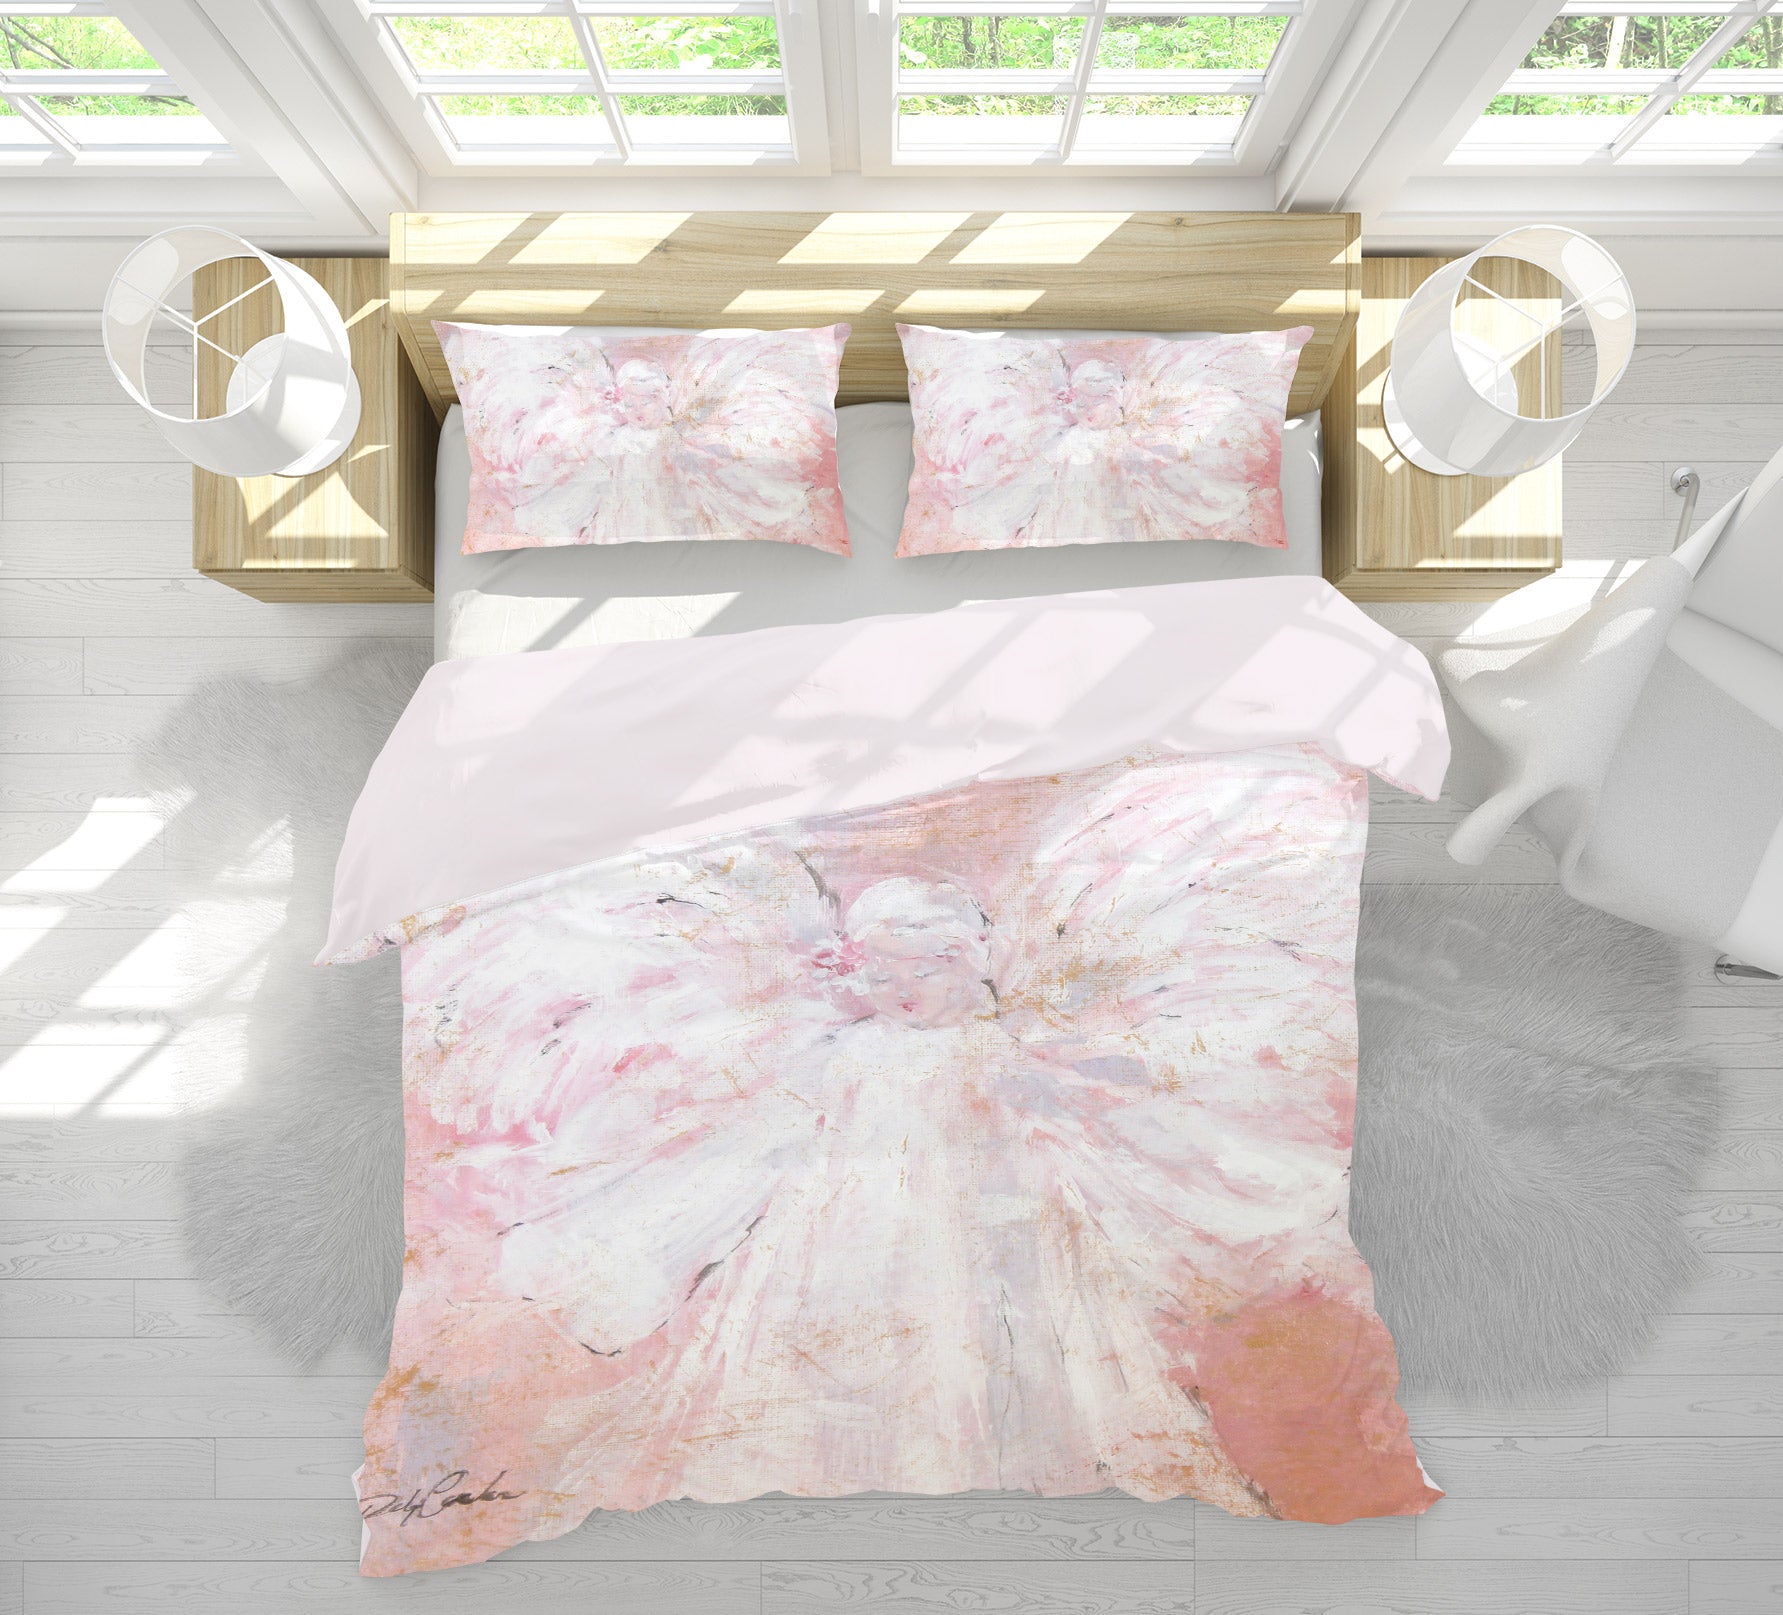 3D Pink Petal Angel 2155 Debi Coules Bedding Bed Pillowcases Quilt